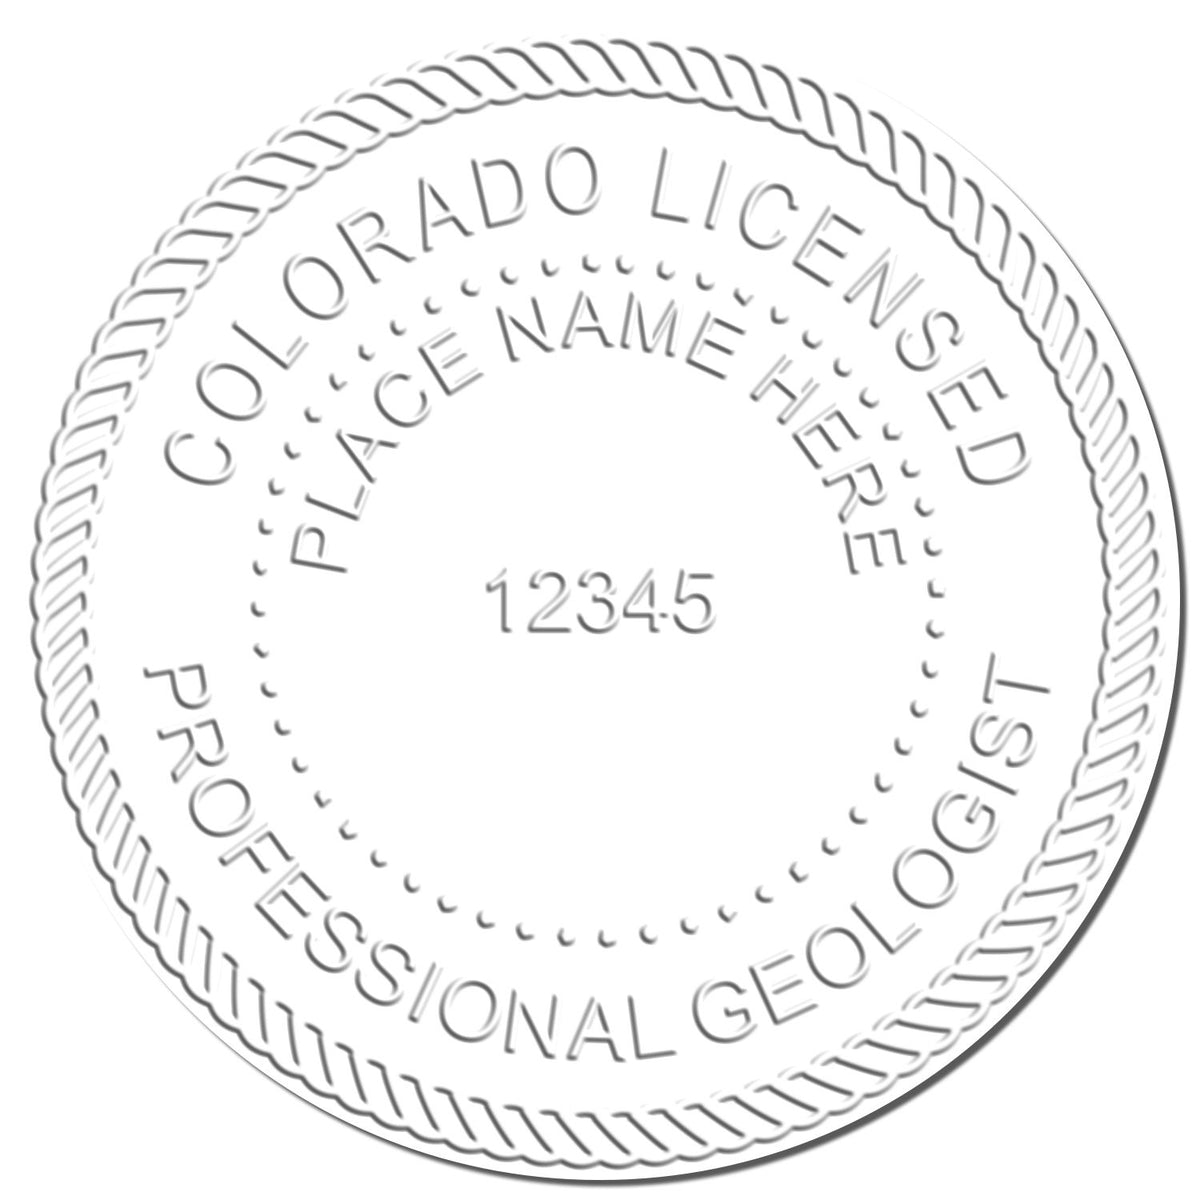 A photograph of the State of Colorado Extended Long Reach Geologist Seal stamp impression reveals a vivid, professional image of the on paper.